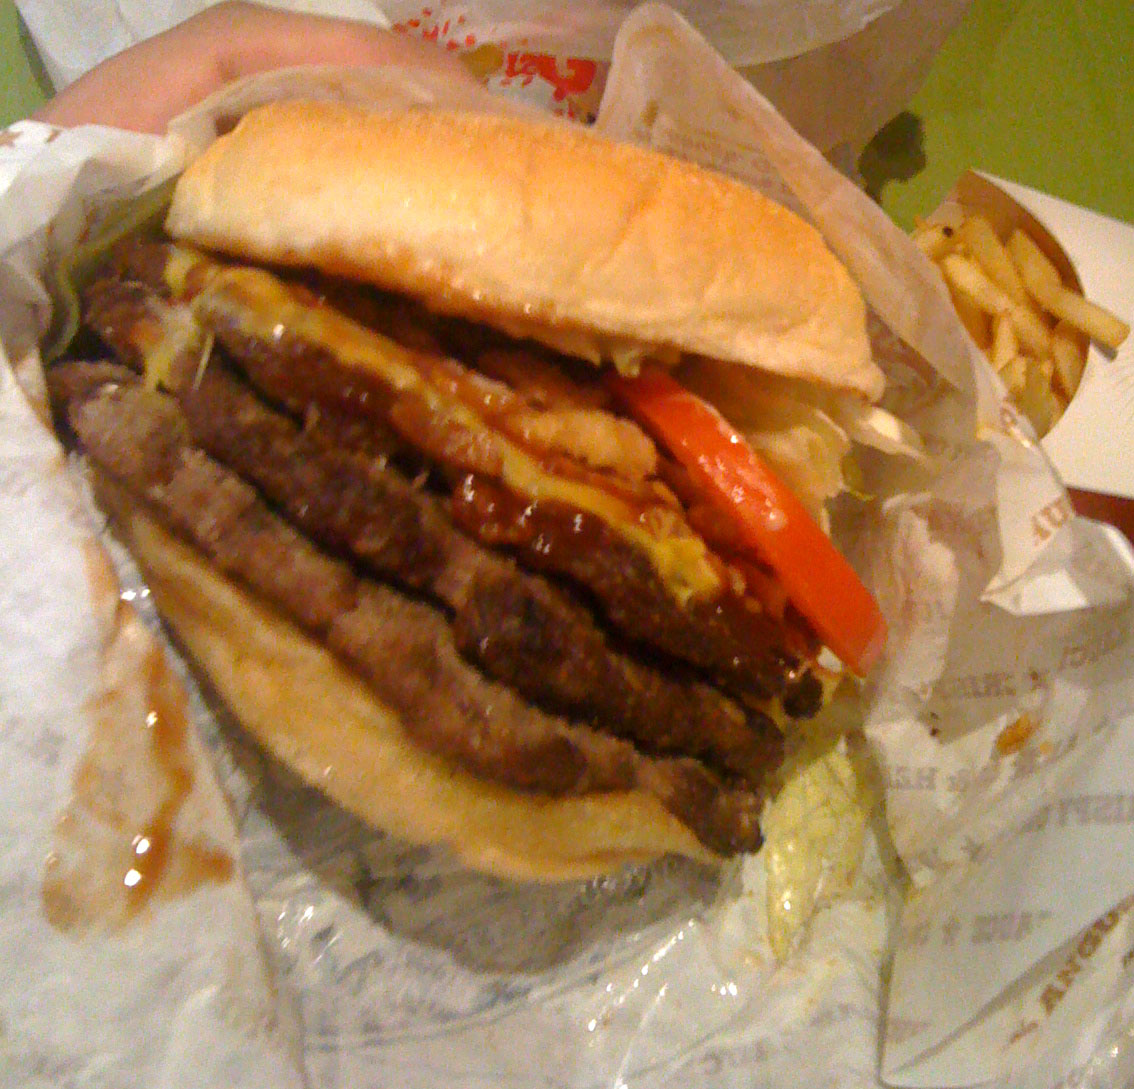 Triple Whopper With Cheese Price